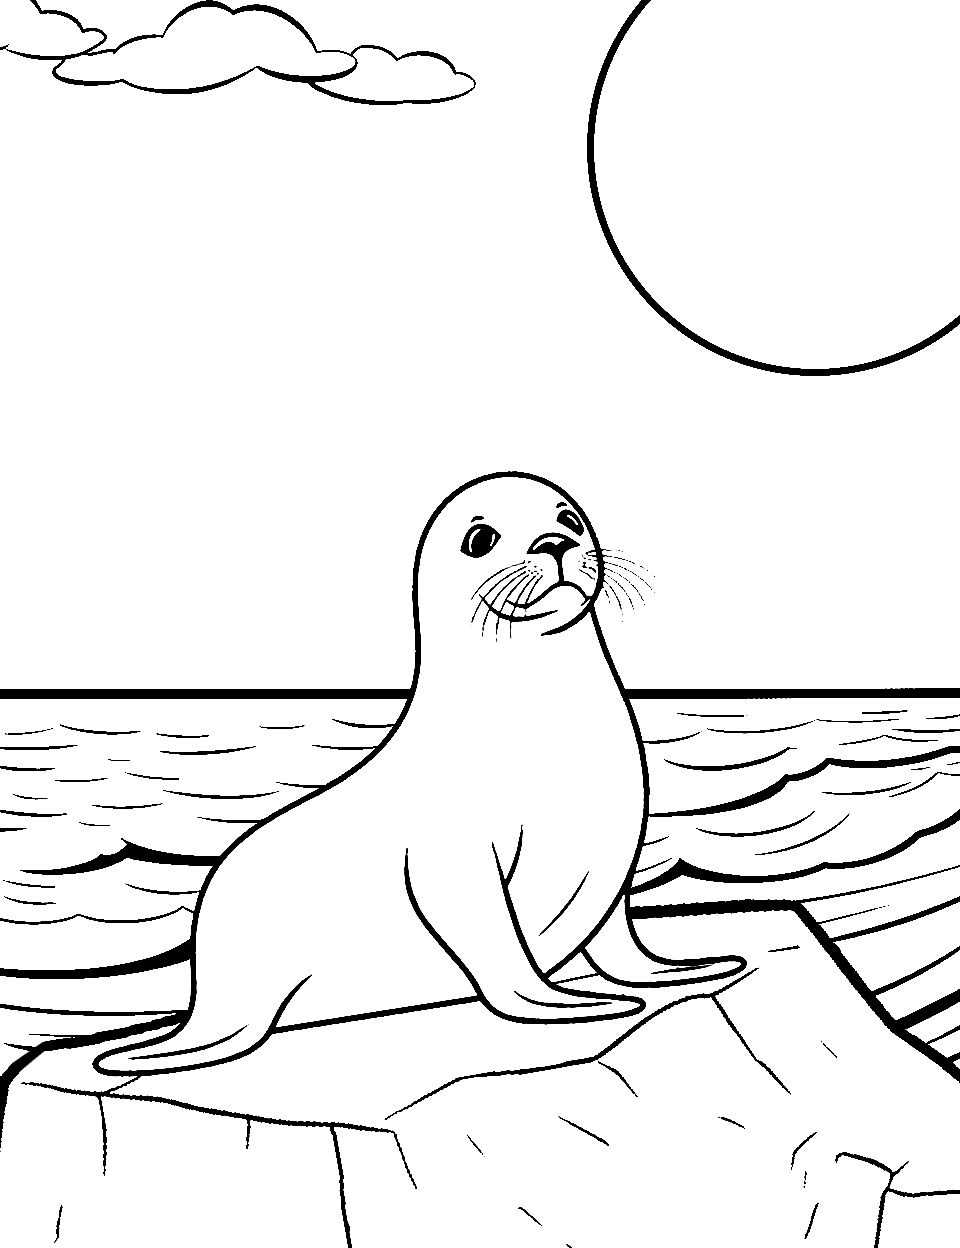 Sea Lion Sunbathing Ocean Coloring Page - A sea lion lounging on a rock with the ocean behind it.